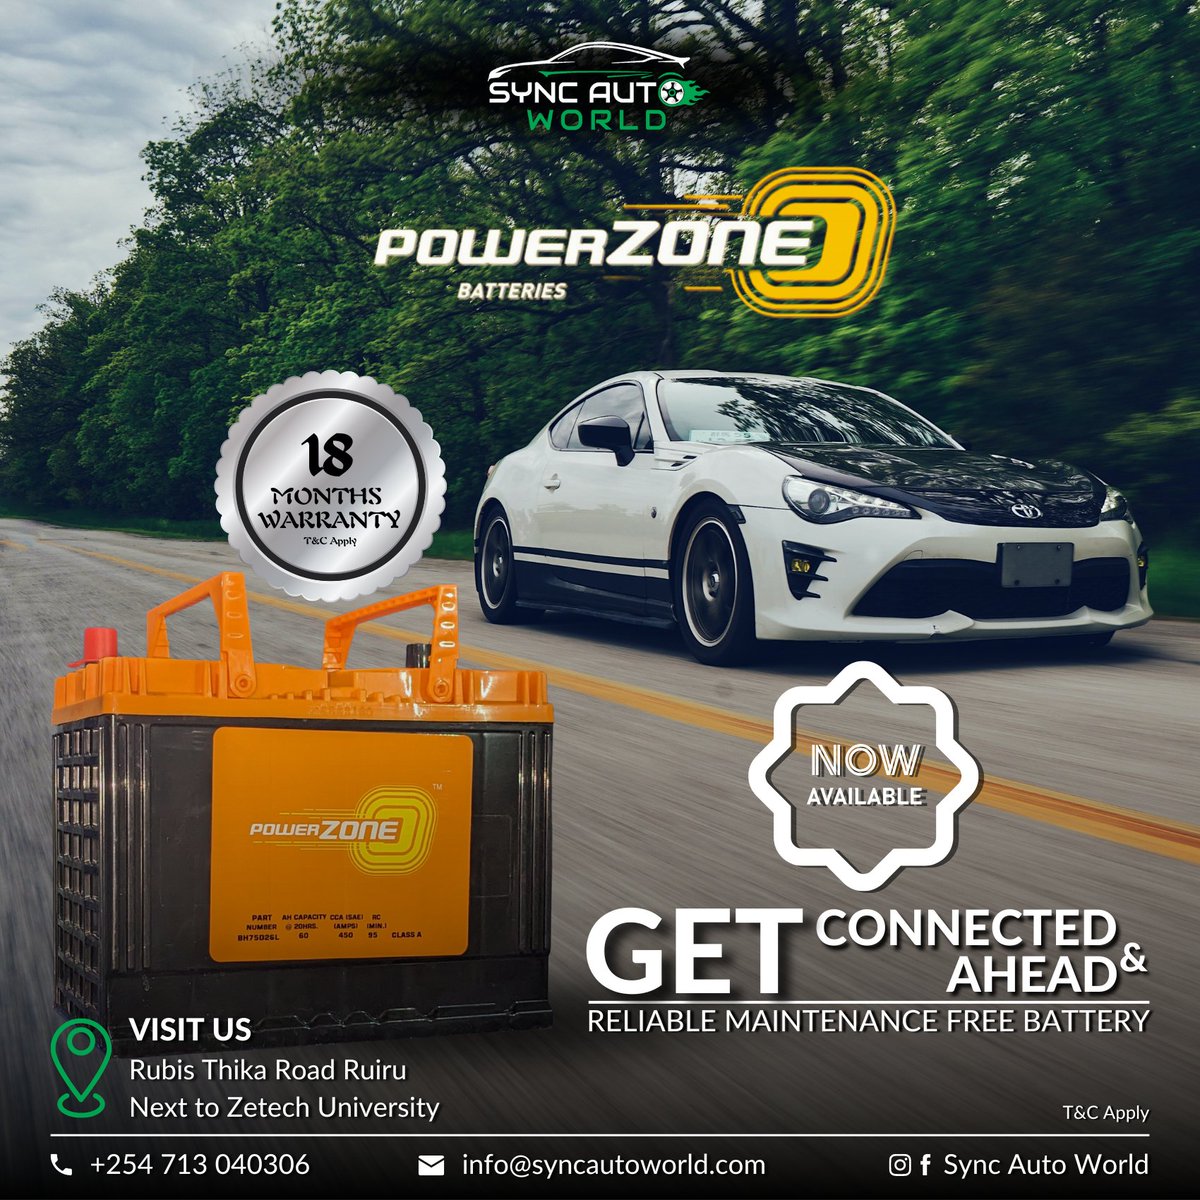 PowerZone Maintenance Free Batteries 🔥🔥 Now Available; in a variety of Sizes.

Don't let a dead battery slow you down: Get Connected, Stay Charged, Keep Moving & Get Ahead!

Visit Us or Dial A Battery on 📞 0713040306
#Battery #batteryreplacement #batteries #spaceyamagari